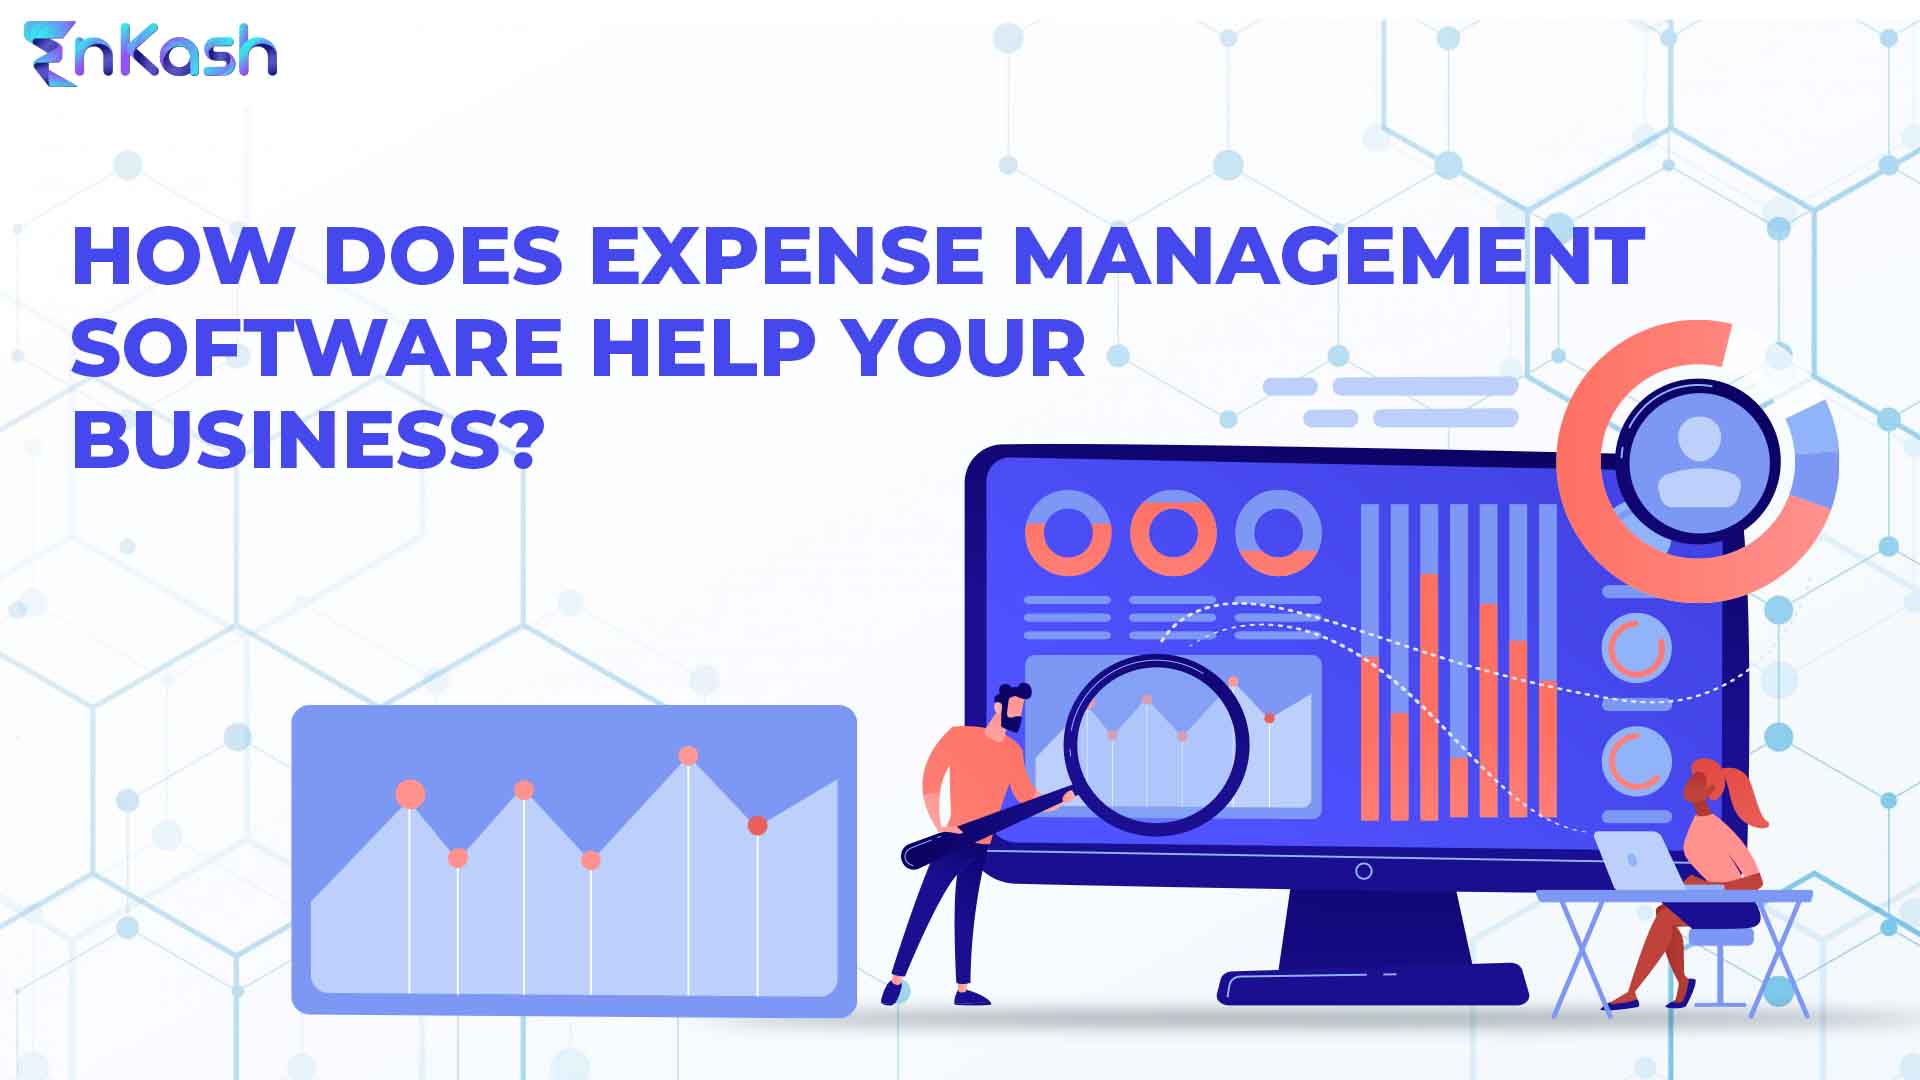 Business expense management software